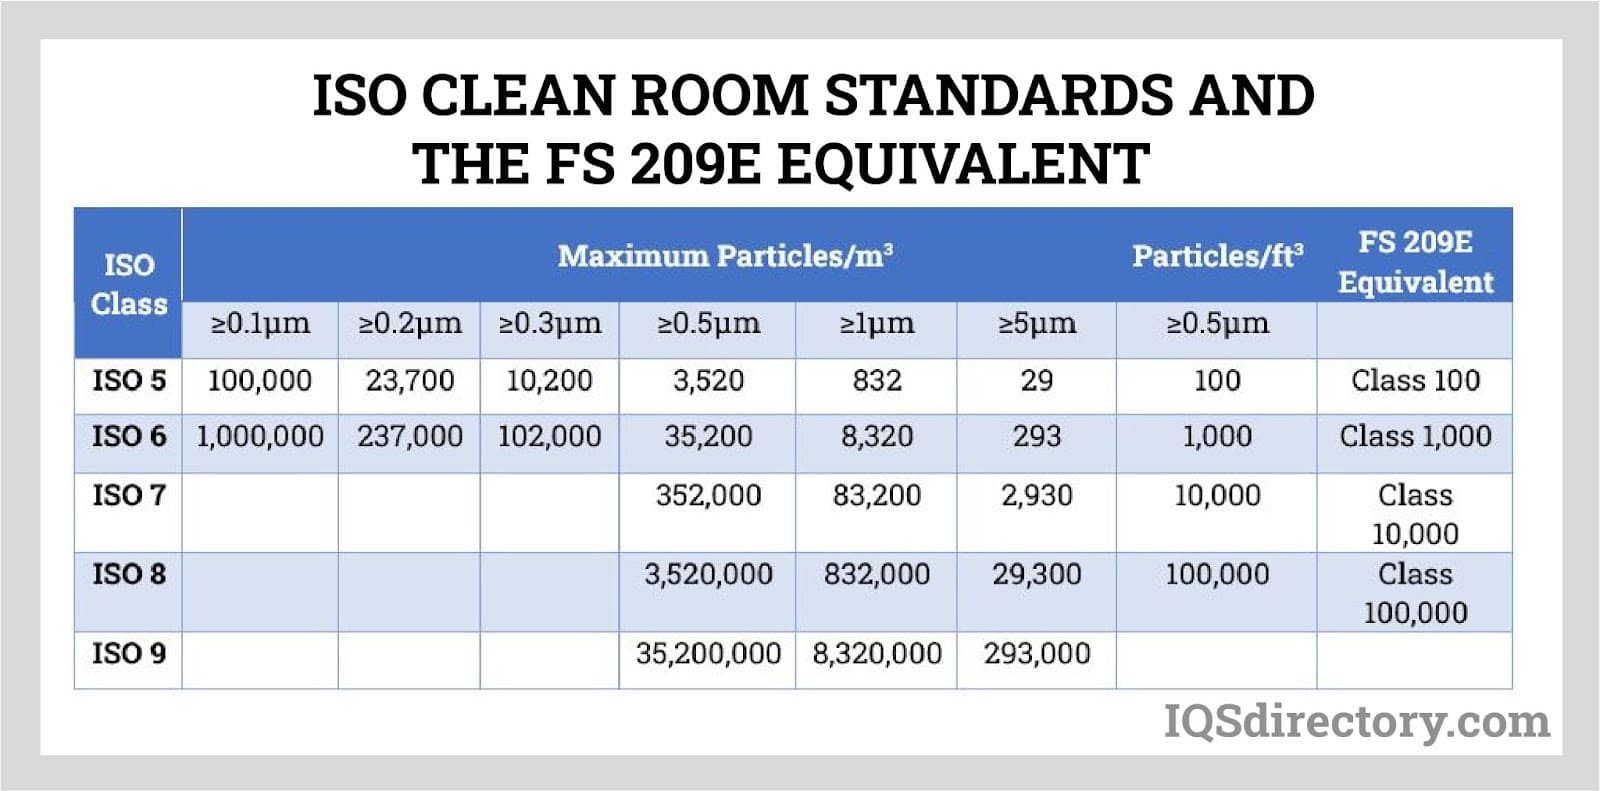 ISO Cleanroom Standards and The FS 209E Equivalent